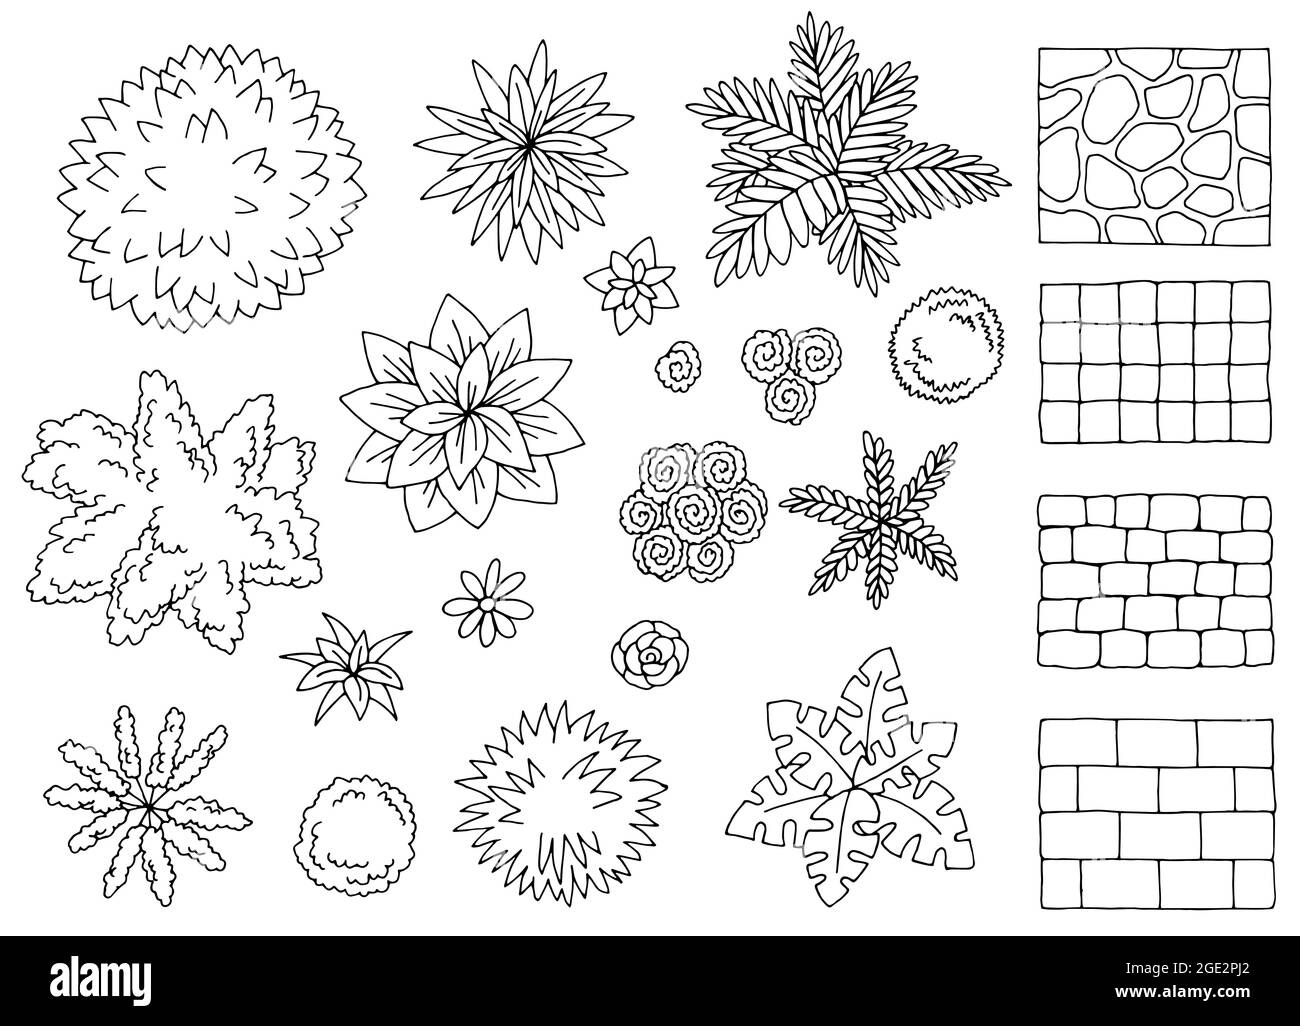 Landscape architect design element set graphic black white top sketch aerial view isolated illustration vector Stock Vector